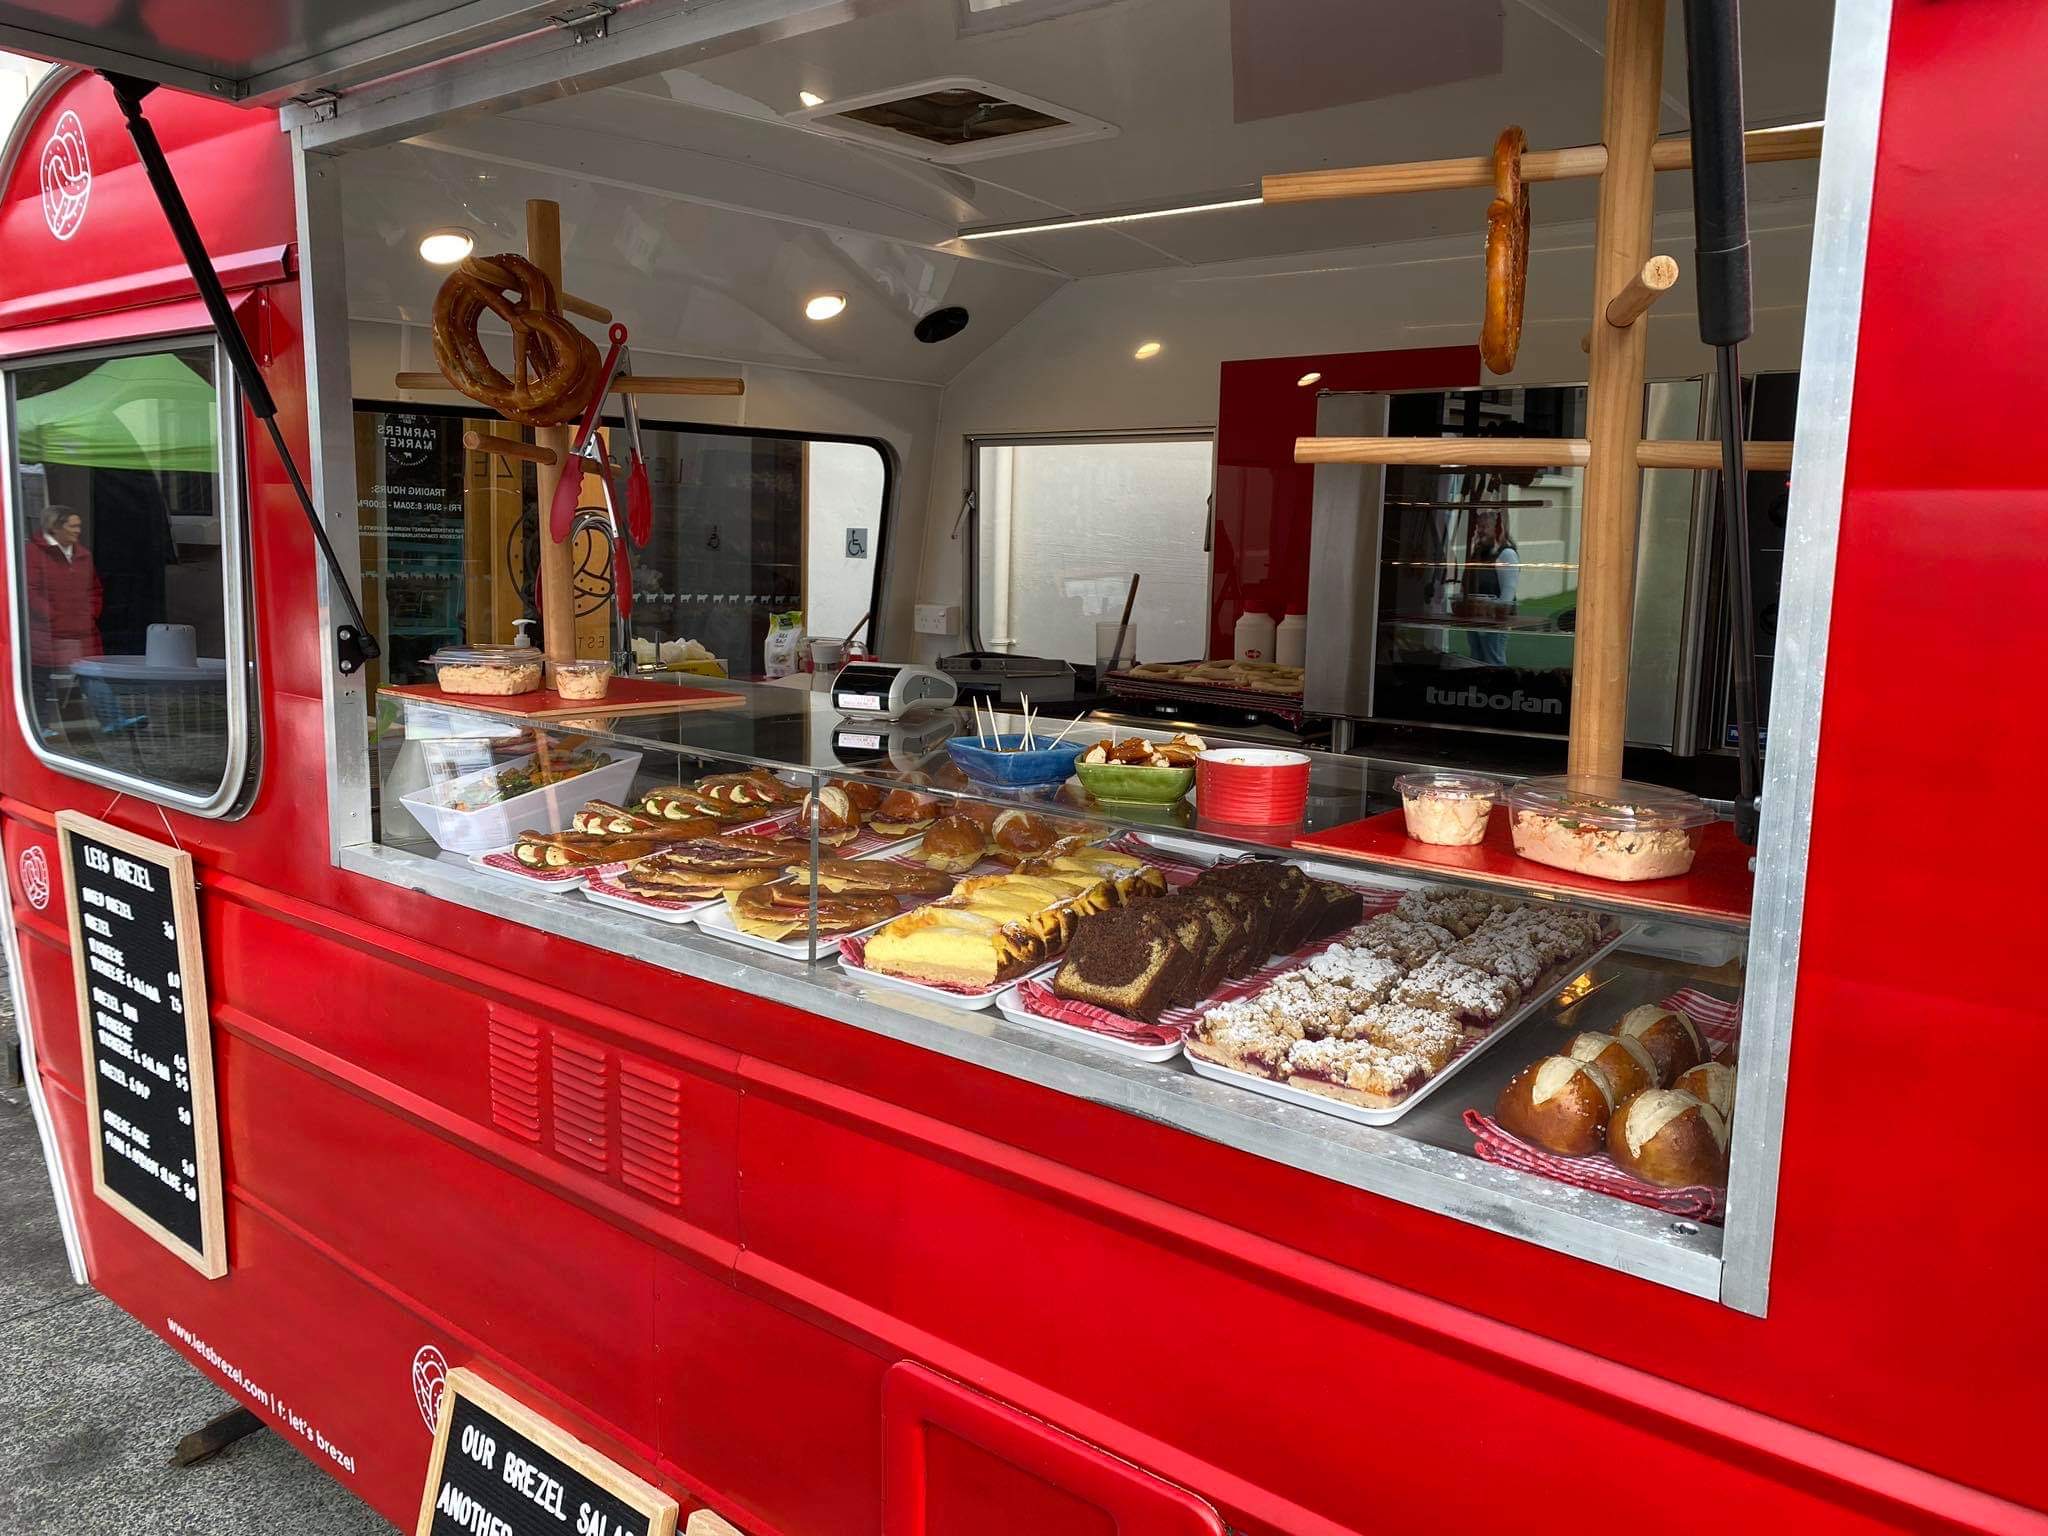 red food truck with pretzels on display and menu sign